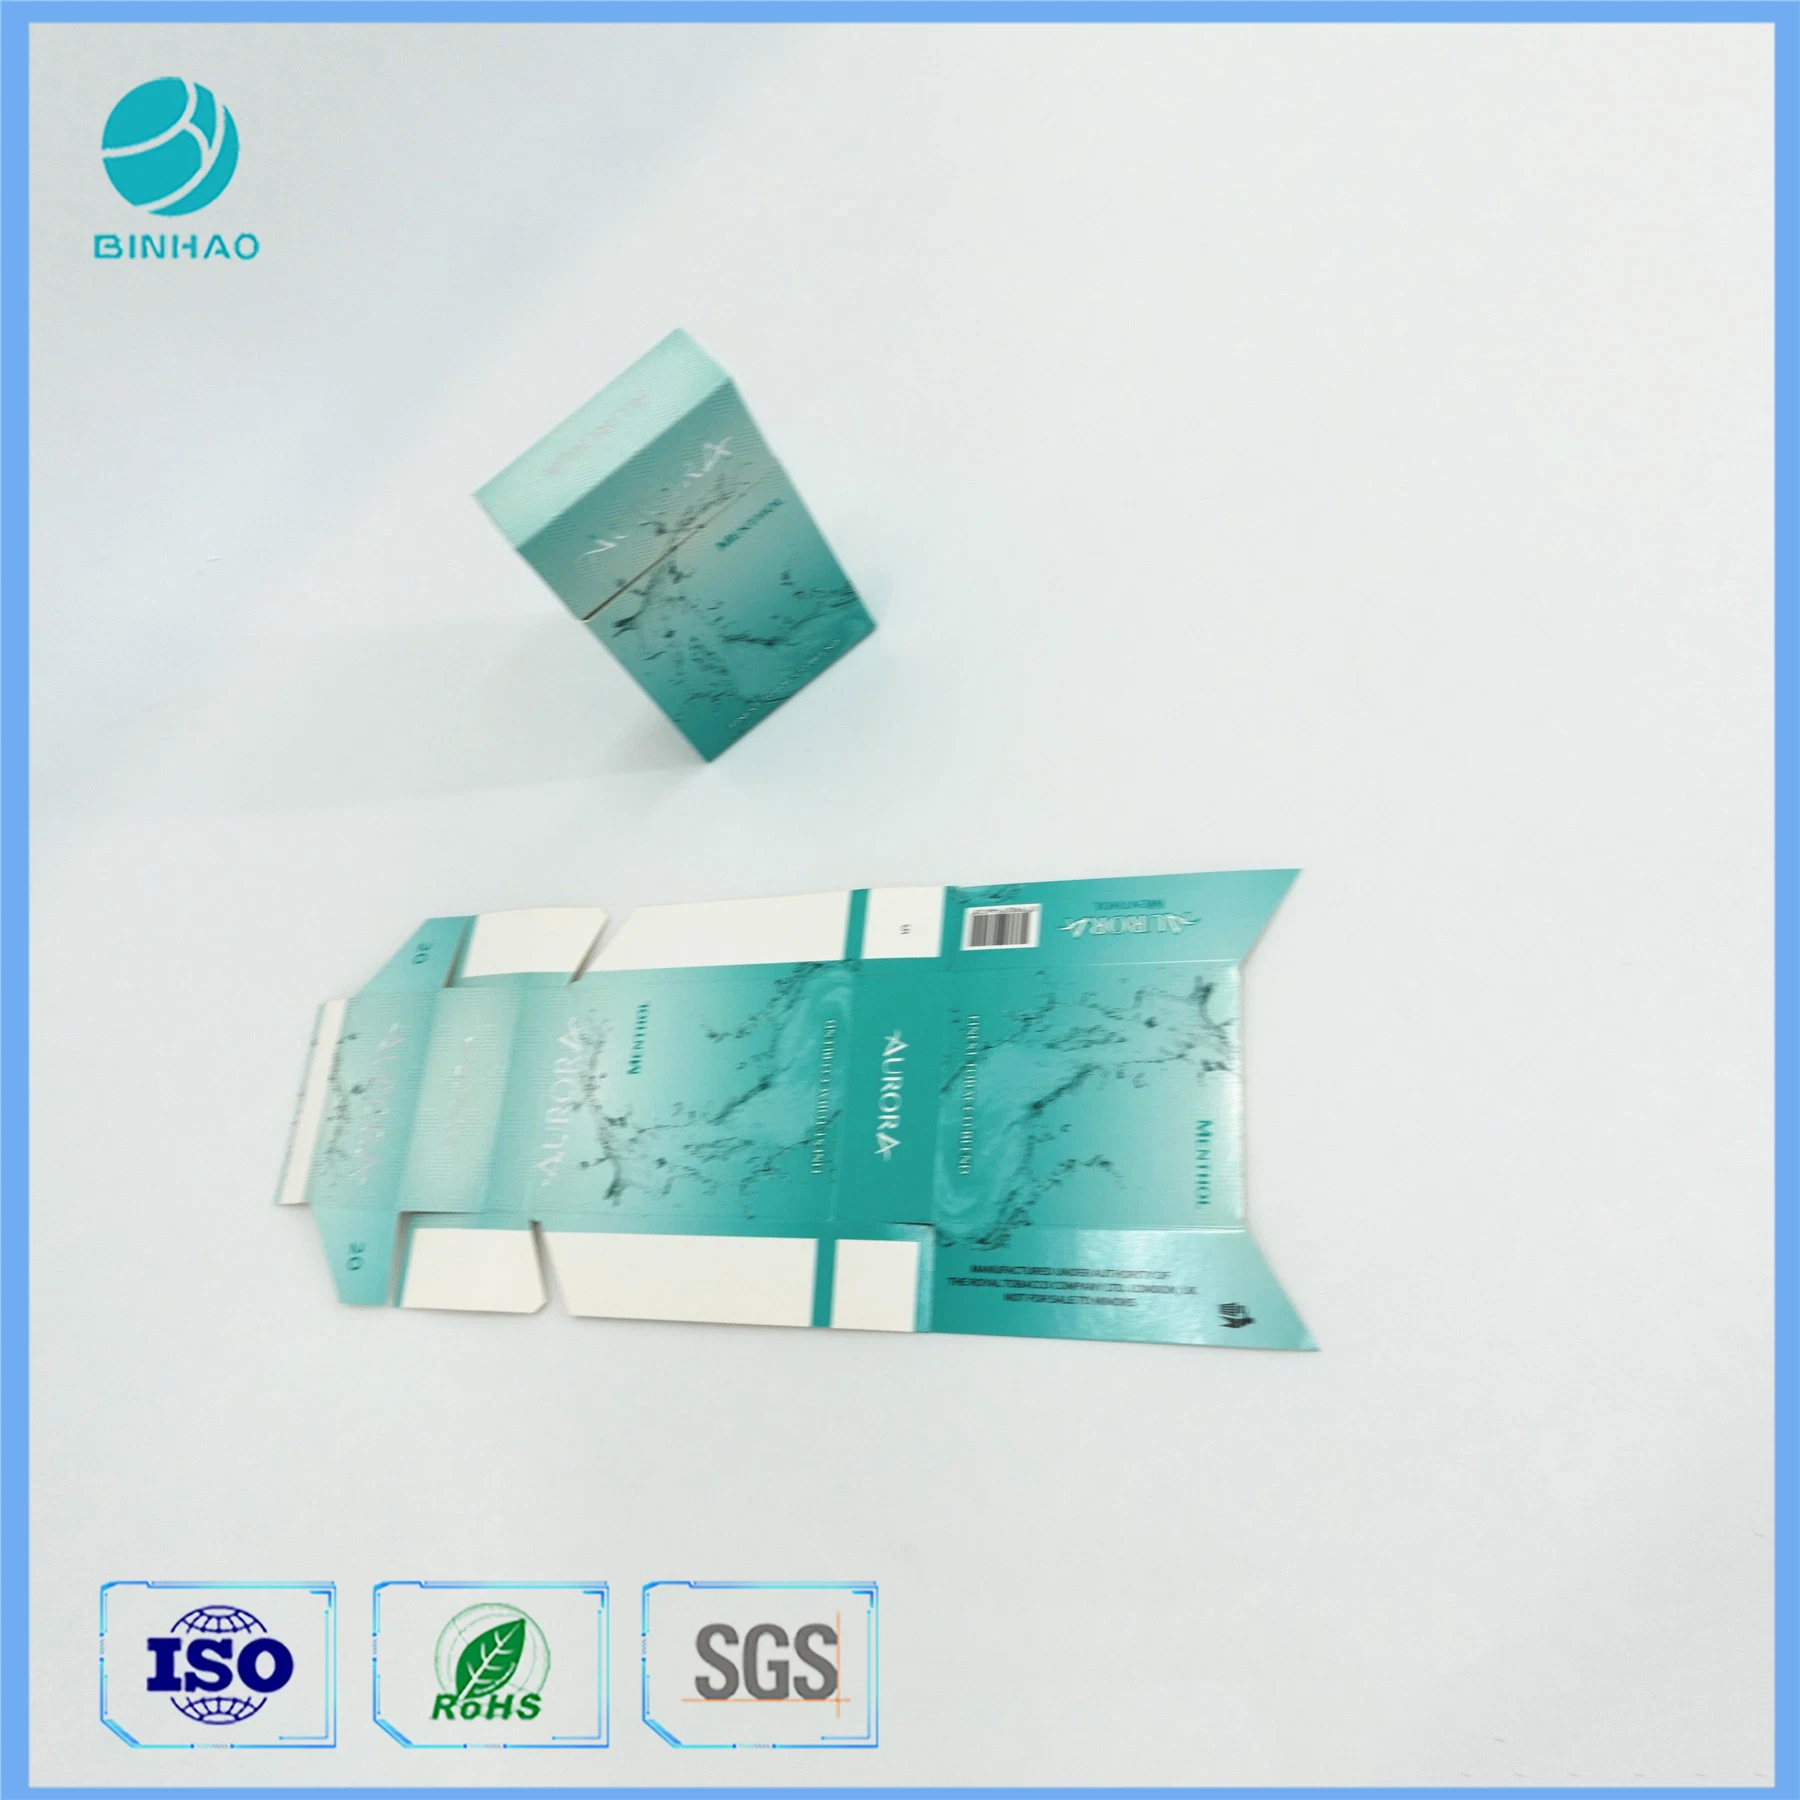 Tobacco Package Cases Printing Sbs/Fbb